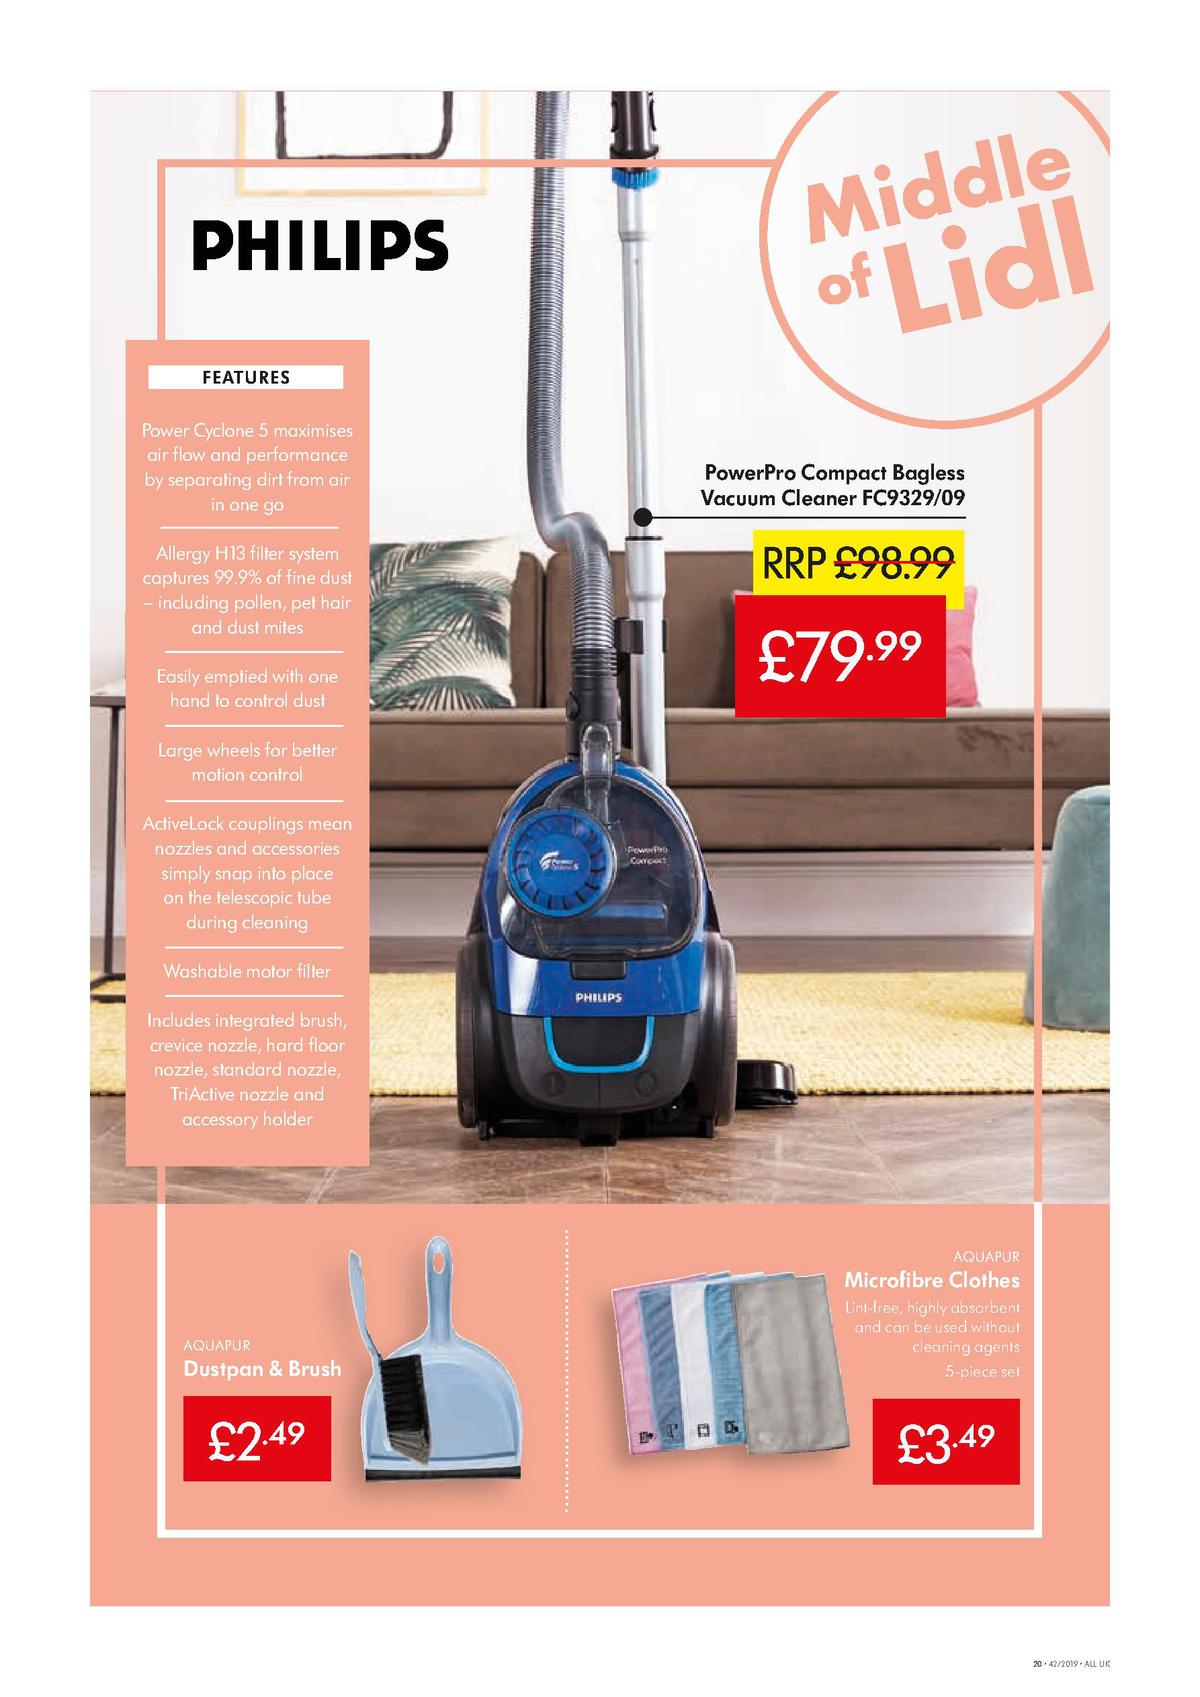 LIDL Offers from 17 October